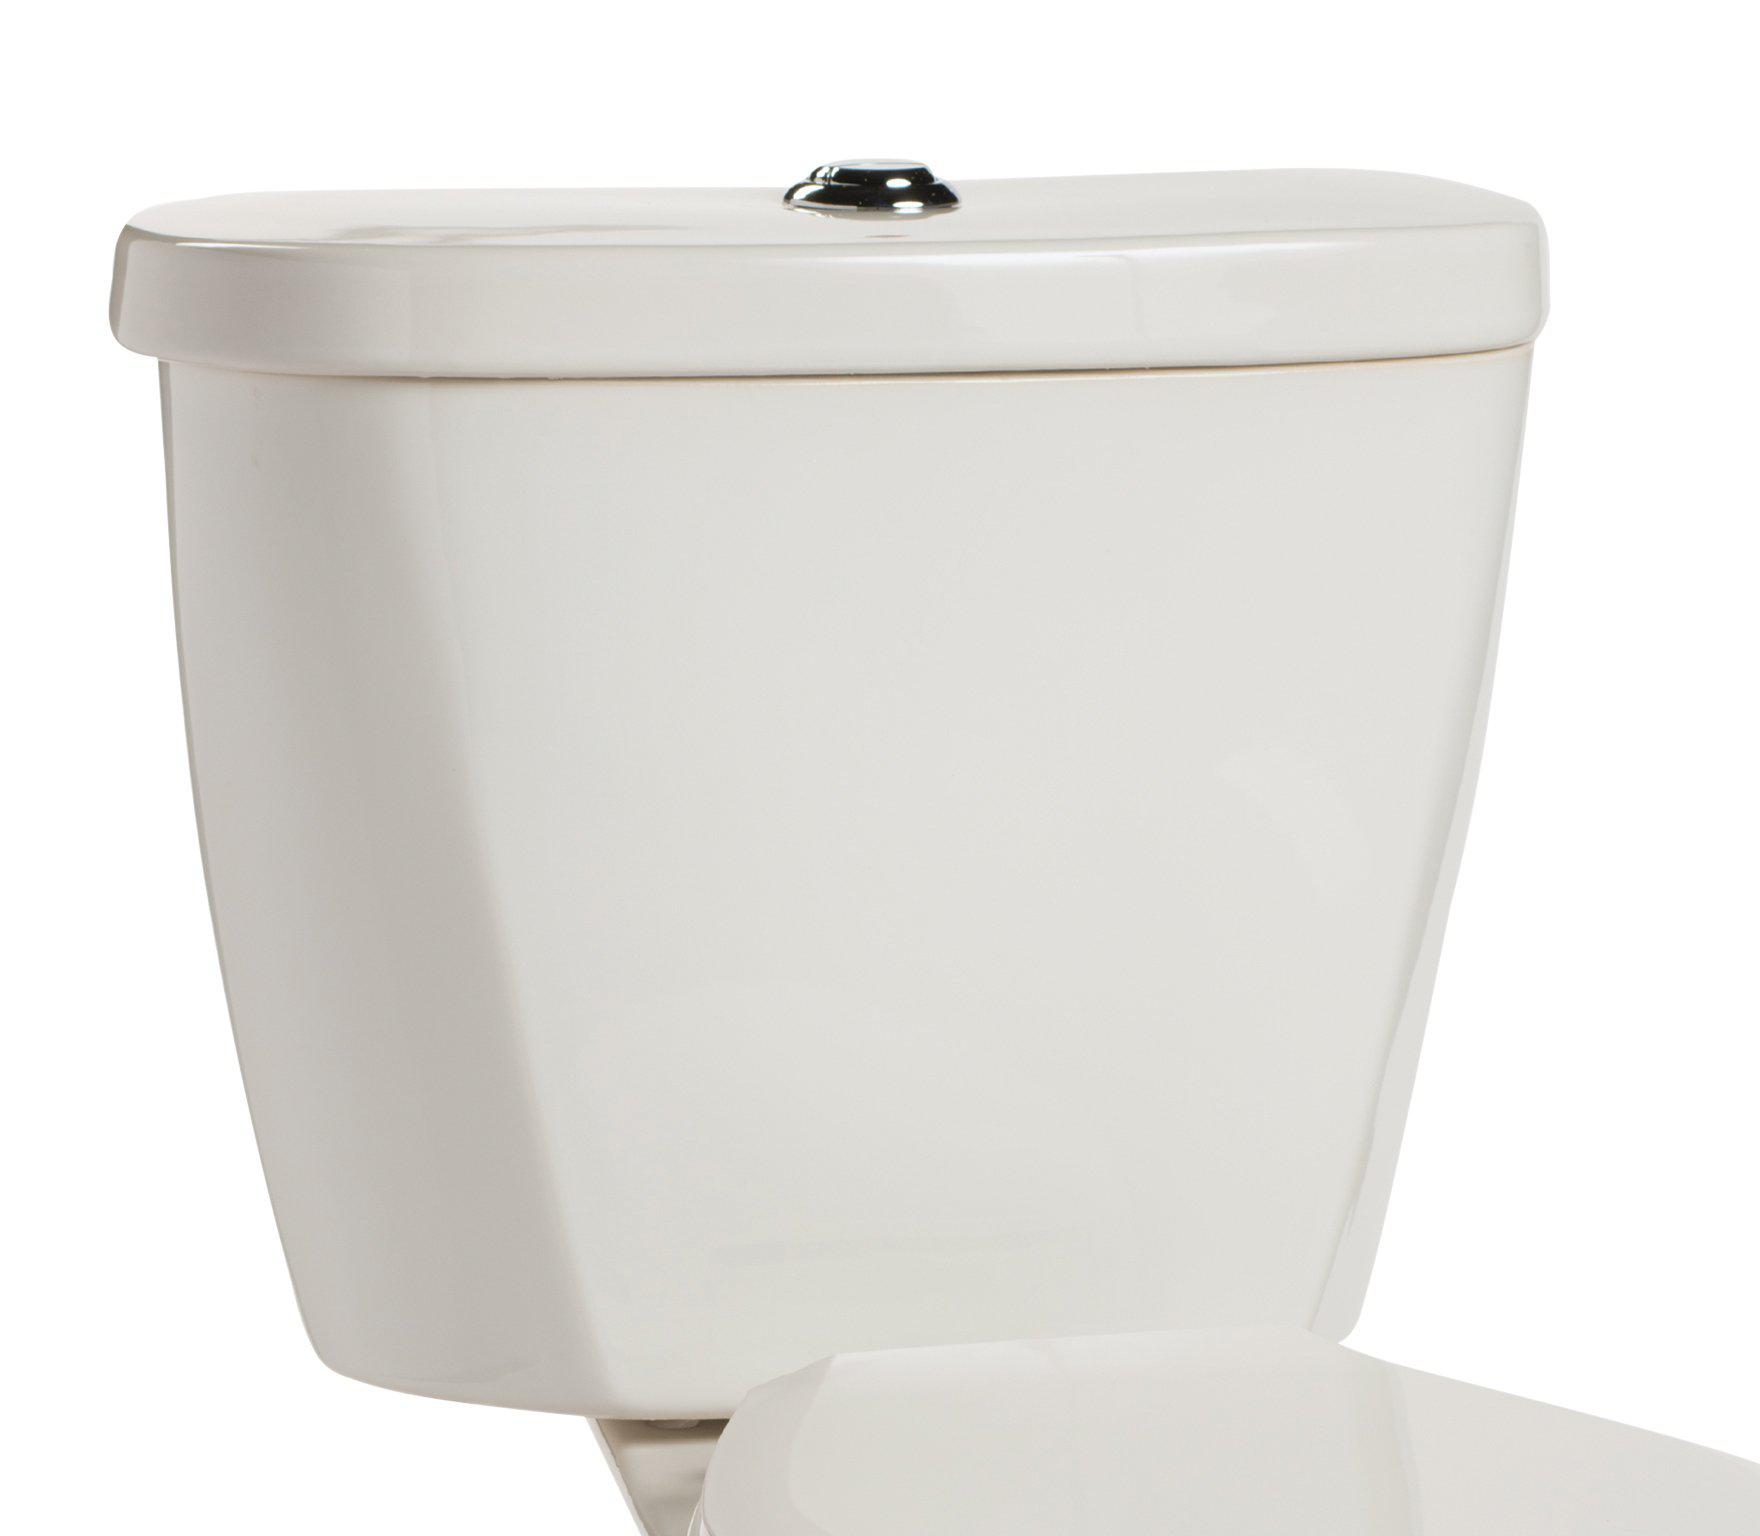 mansfield plumbing 3386 summit dual (toilet tank only), white